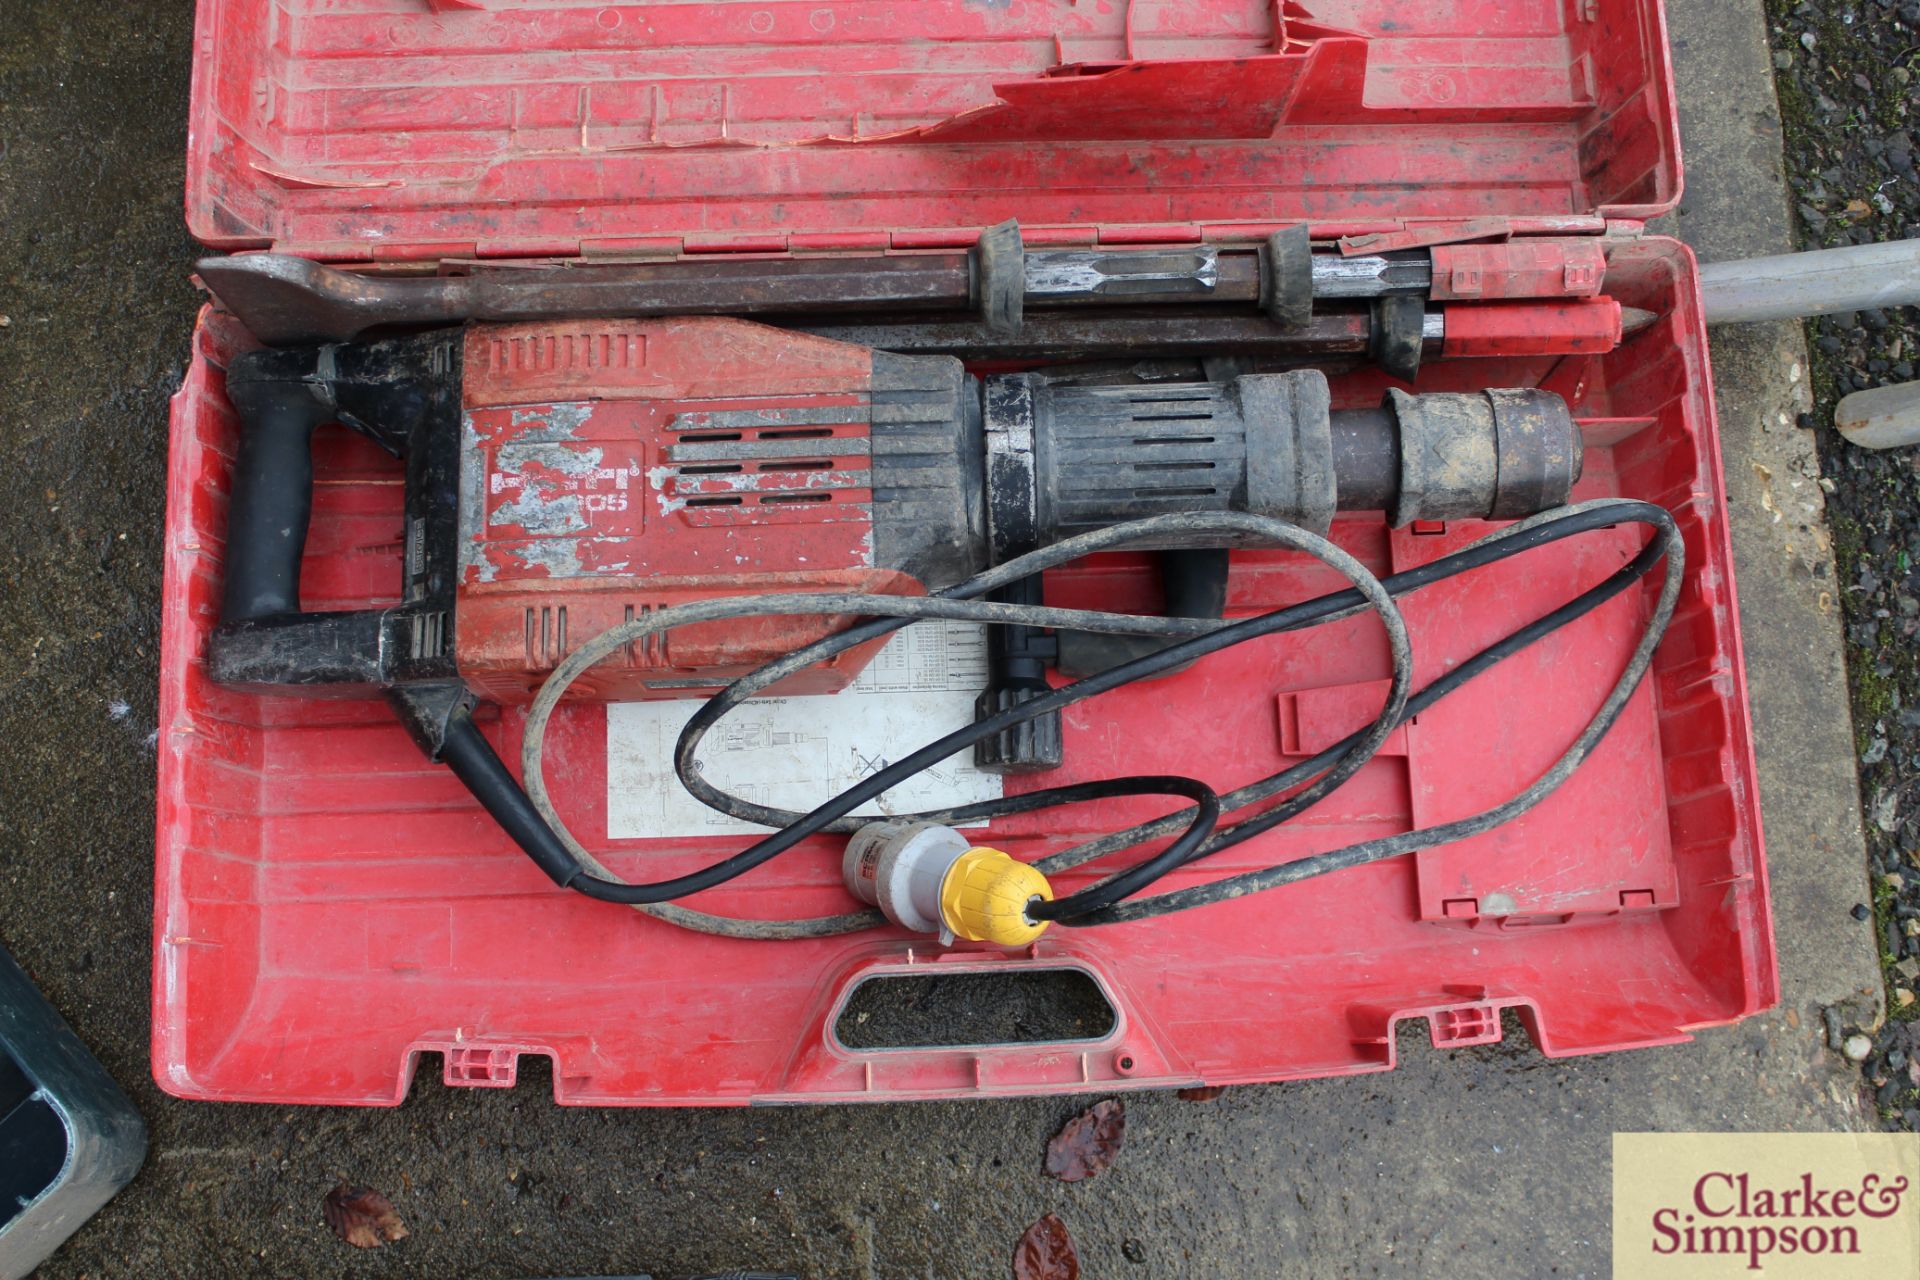 Hilti TE 905-AVR 110V breaker in case with various chisels. Vendor reports this was reconditioned - Image 2 of 6